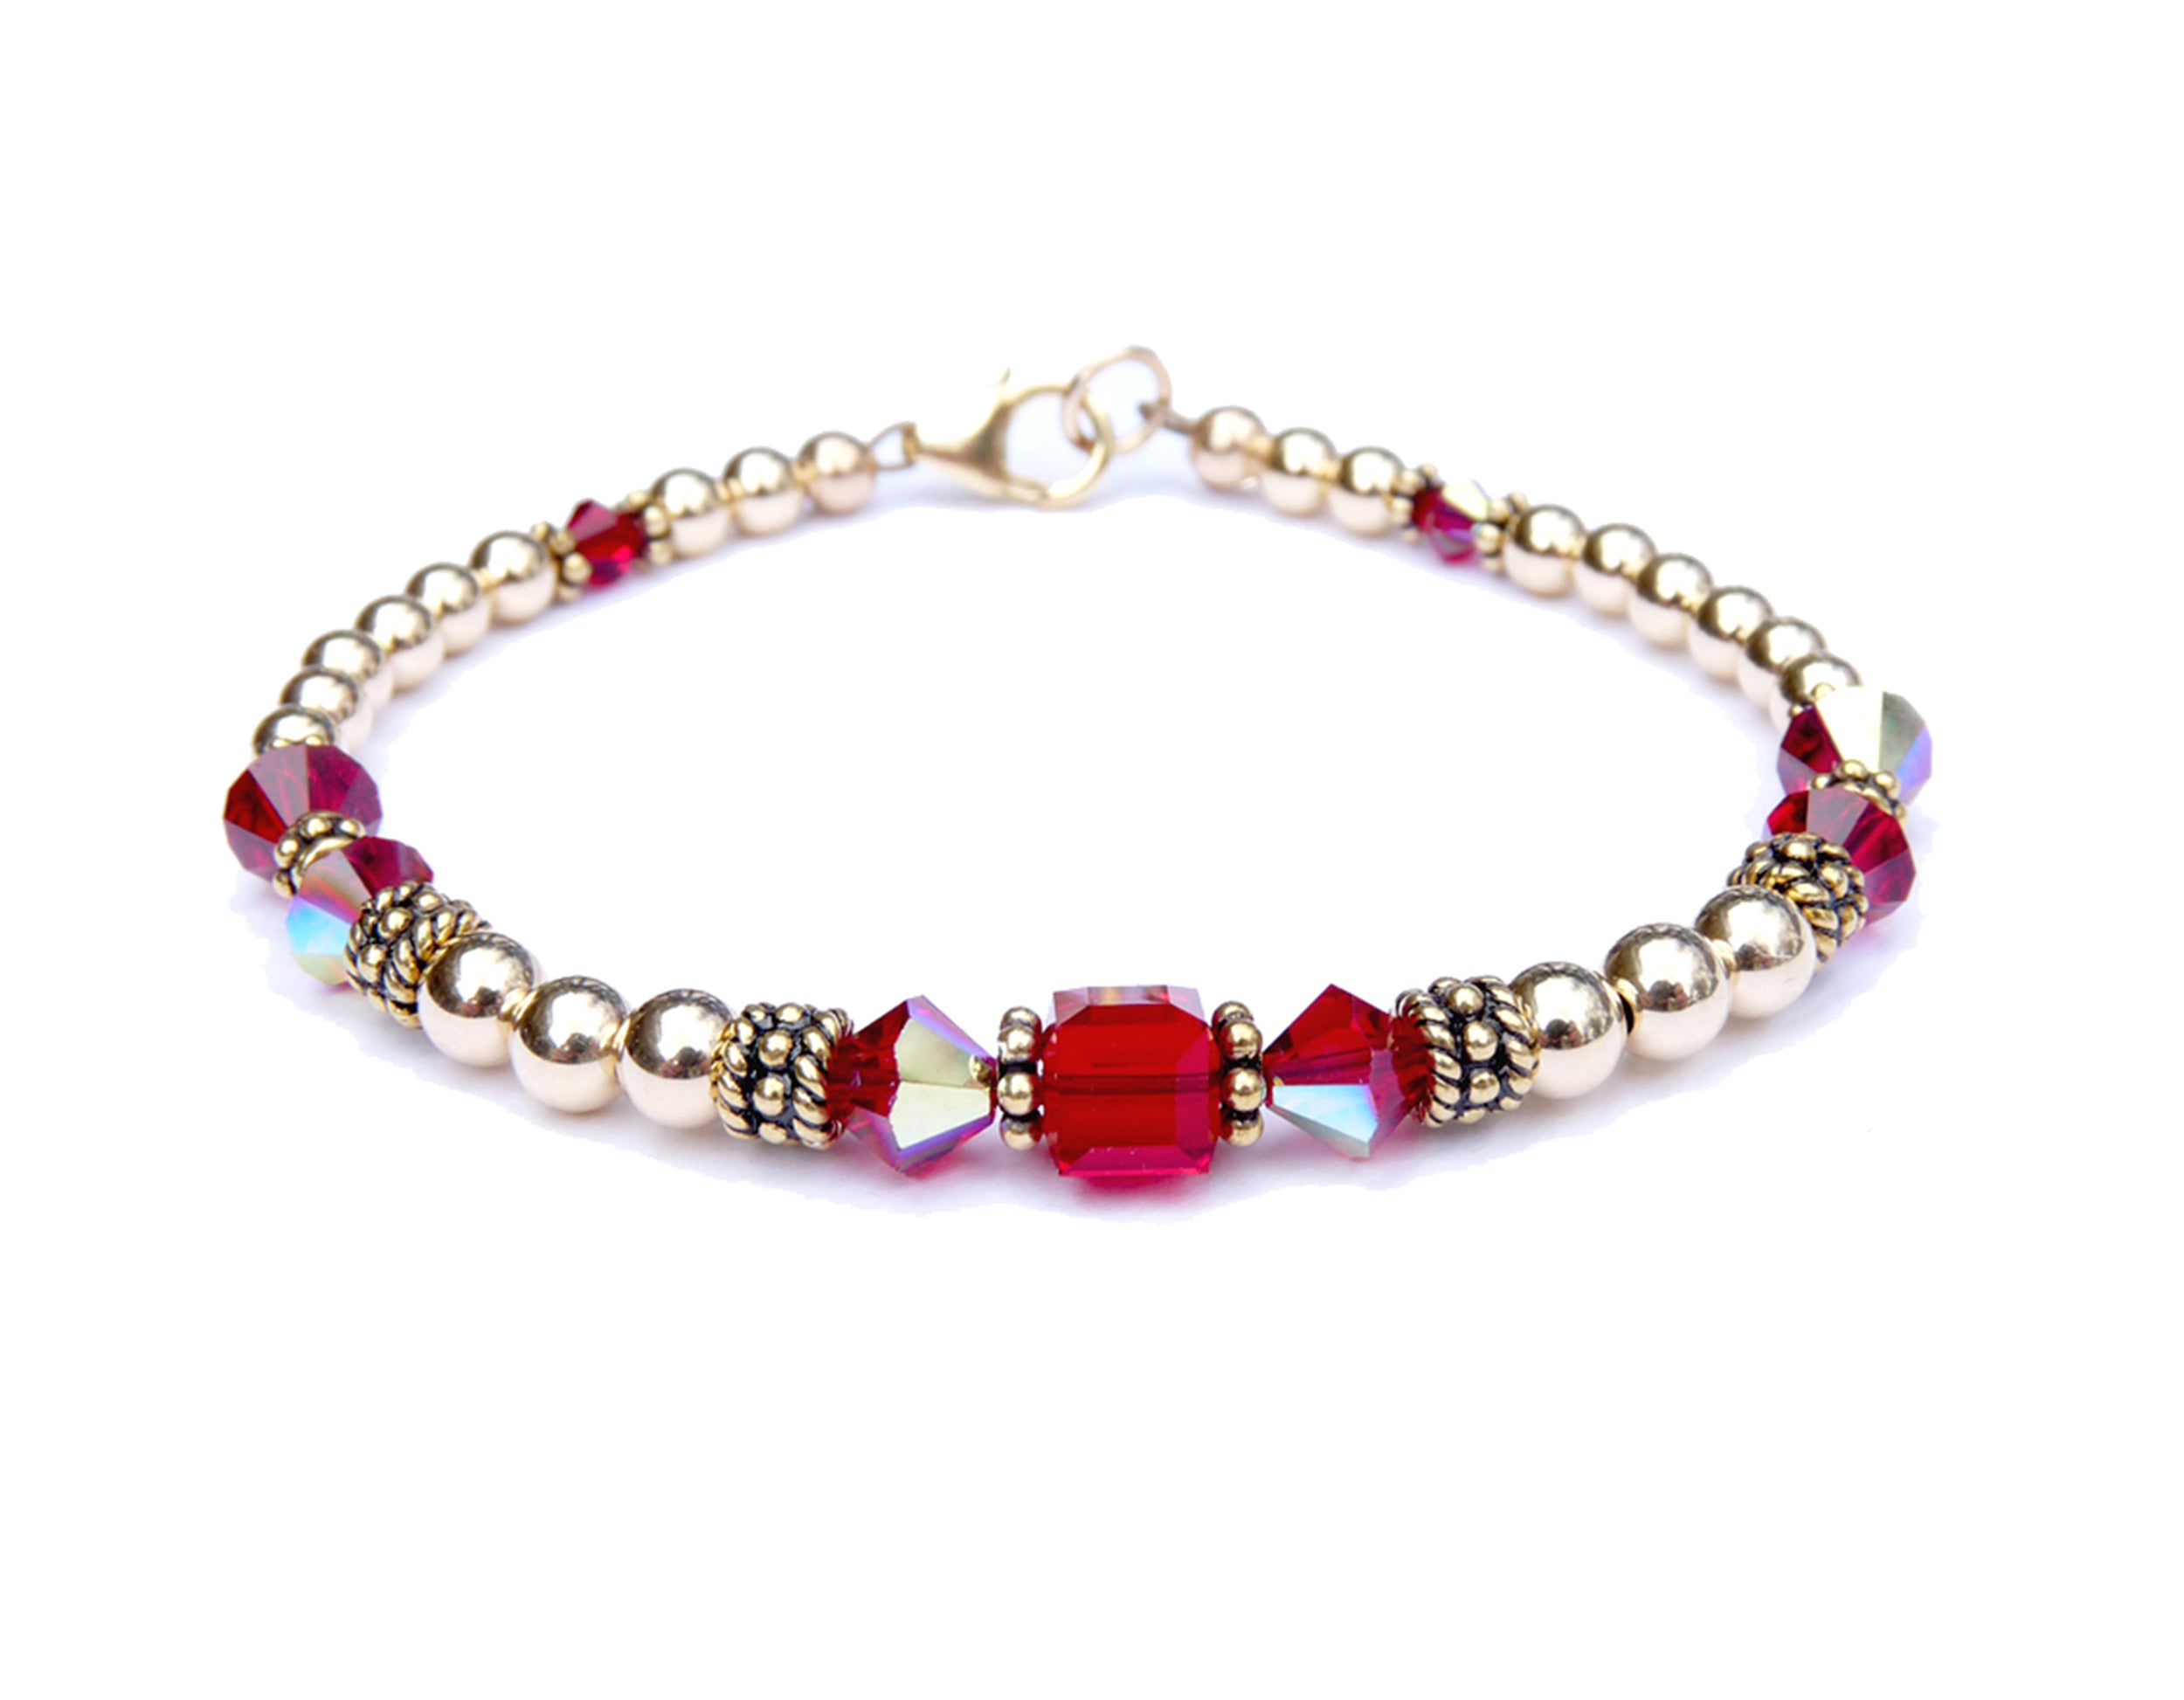 Handmade Birthstone Jewelry with Crystals, Freshwater Pearls, and Real Gemstones.